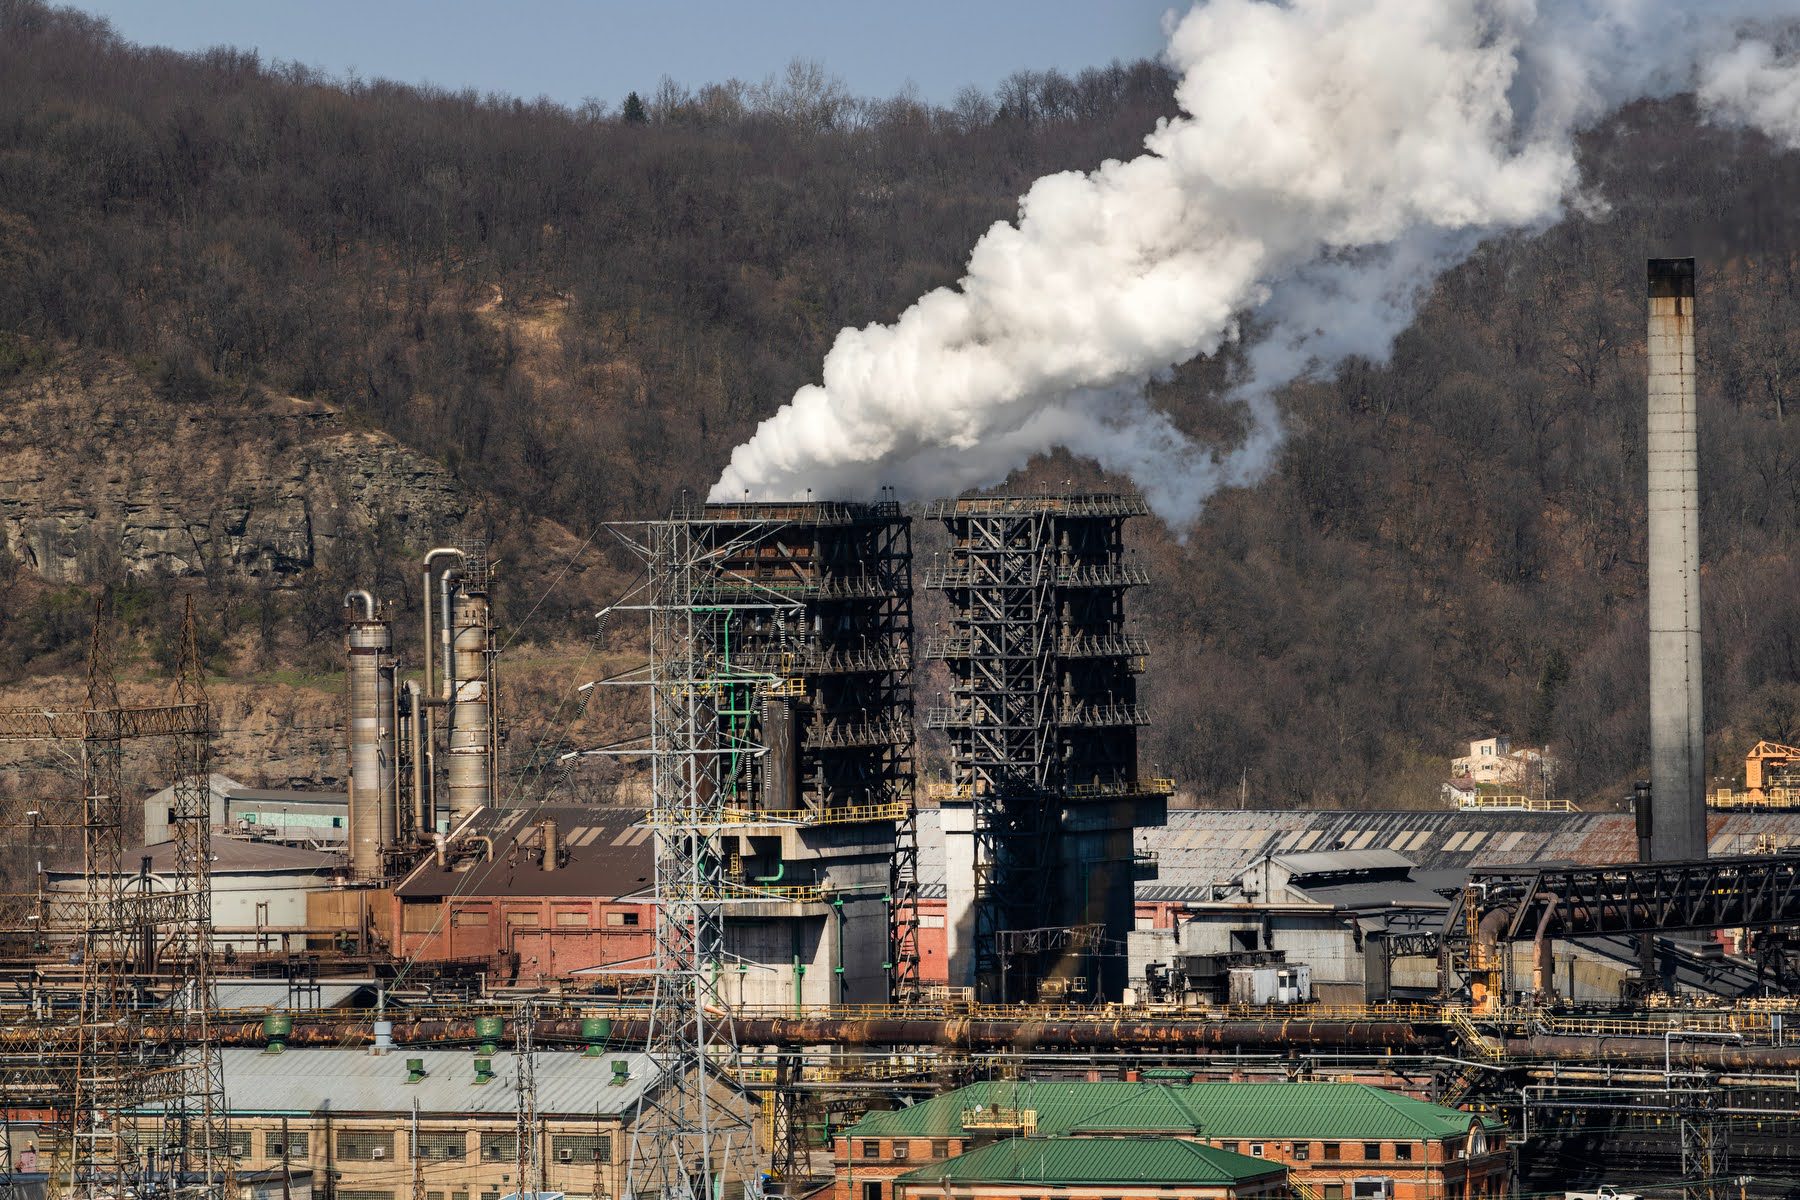 Steam rises from a cooling tower at Clairton Coke Works. Credit: Scott Goldsmith/Inside Climate News